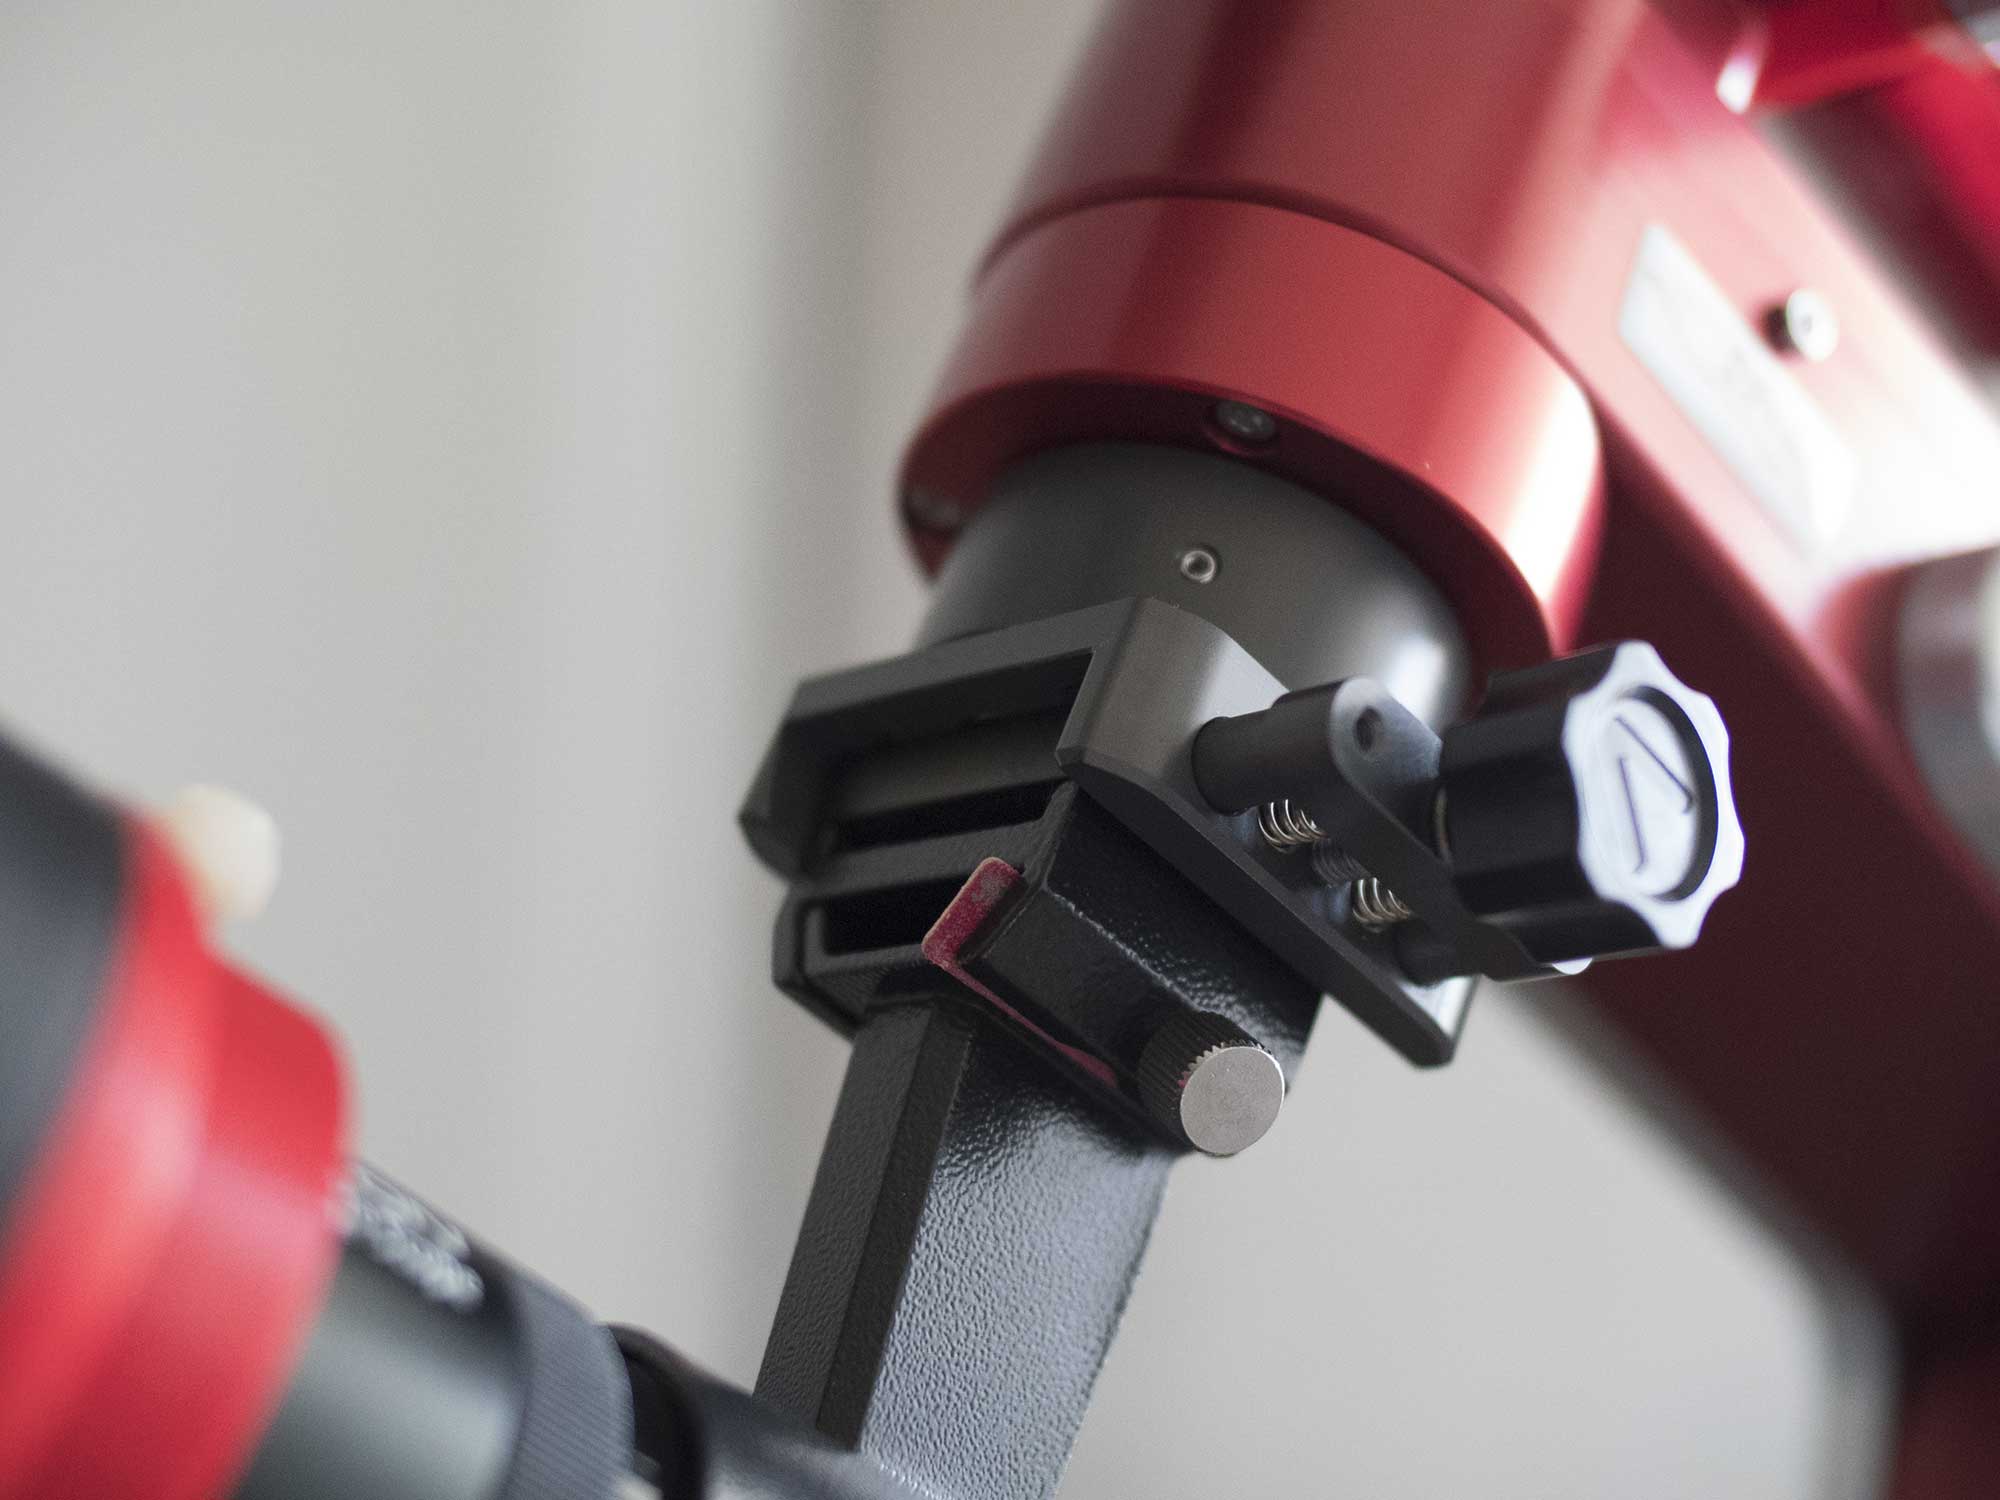 Positioning the finder scope